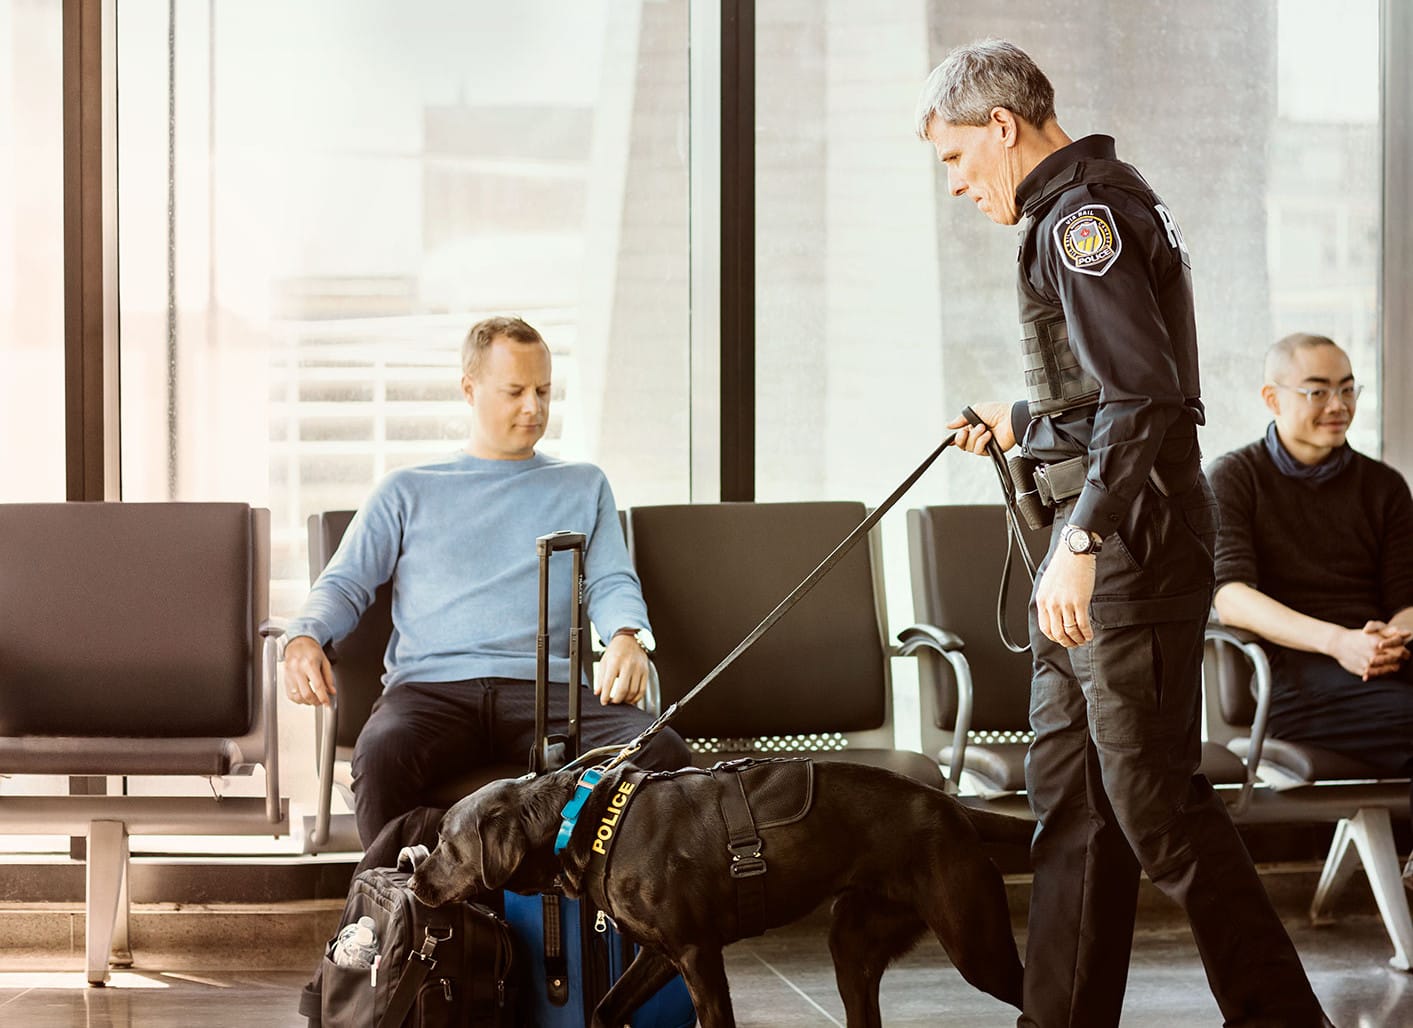 Photo of Police with a dog scaning a man's luggage.